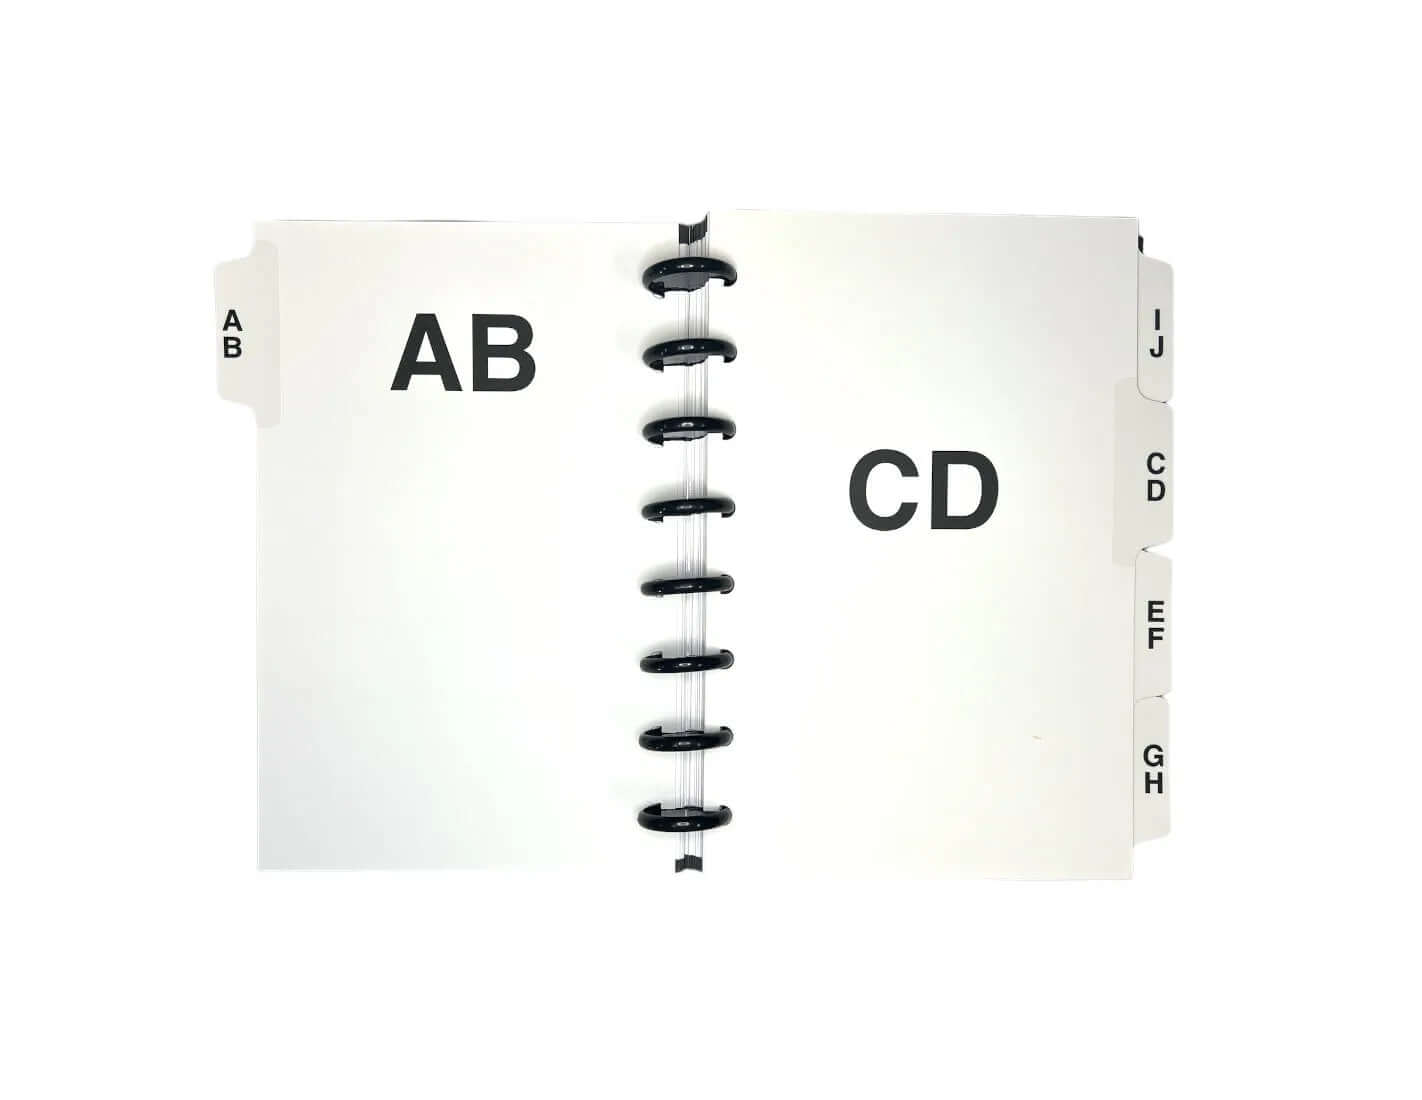 The moveable, alphabetical index tabs have their letters printed large on both sides of each sheet.